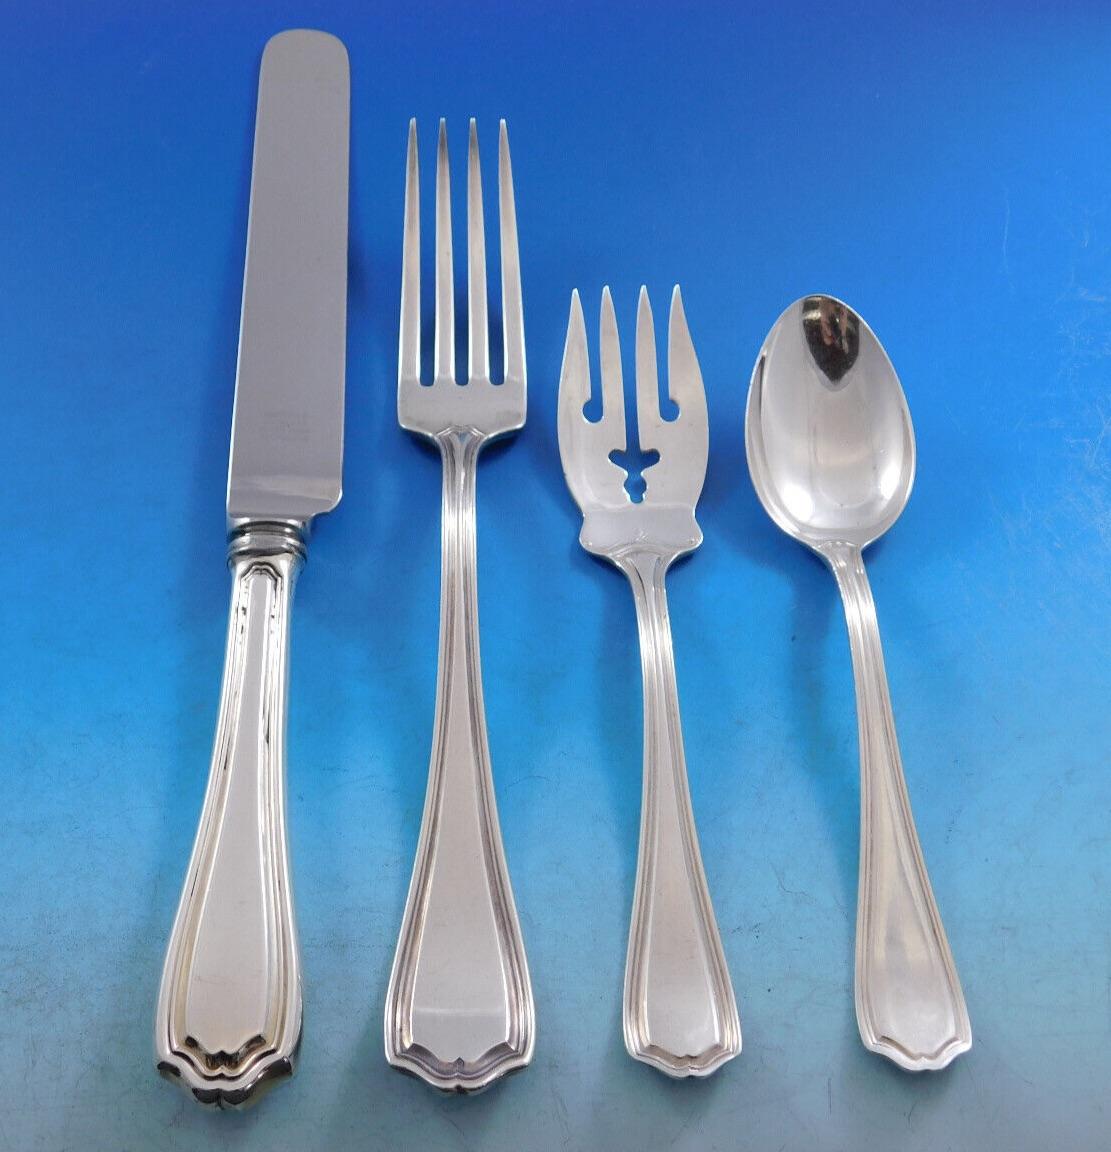 Monumental Hepplewhite by Reed & Barton sterling silver Flatware set, 169 pieces. This tailored, timeless pattern is a best seller and was introduced in the year 1907. This set includes:

12 Dinner Size Knives, 9 5/8